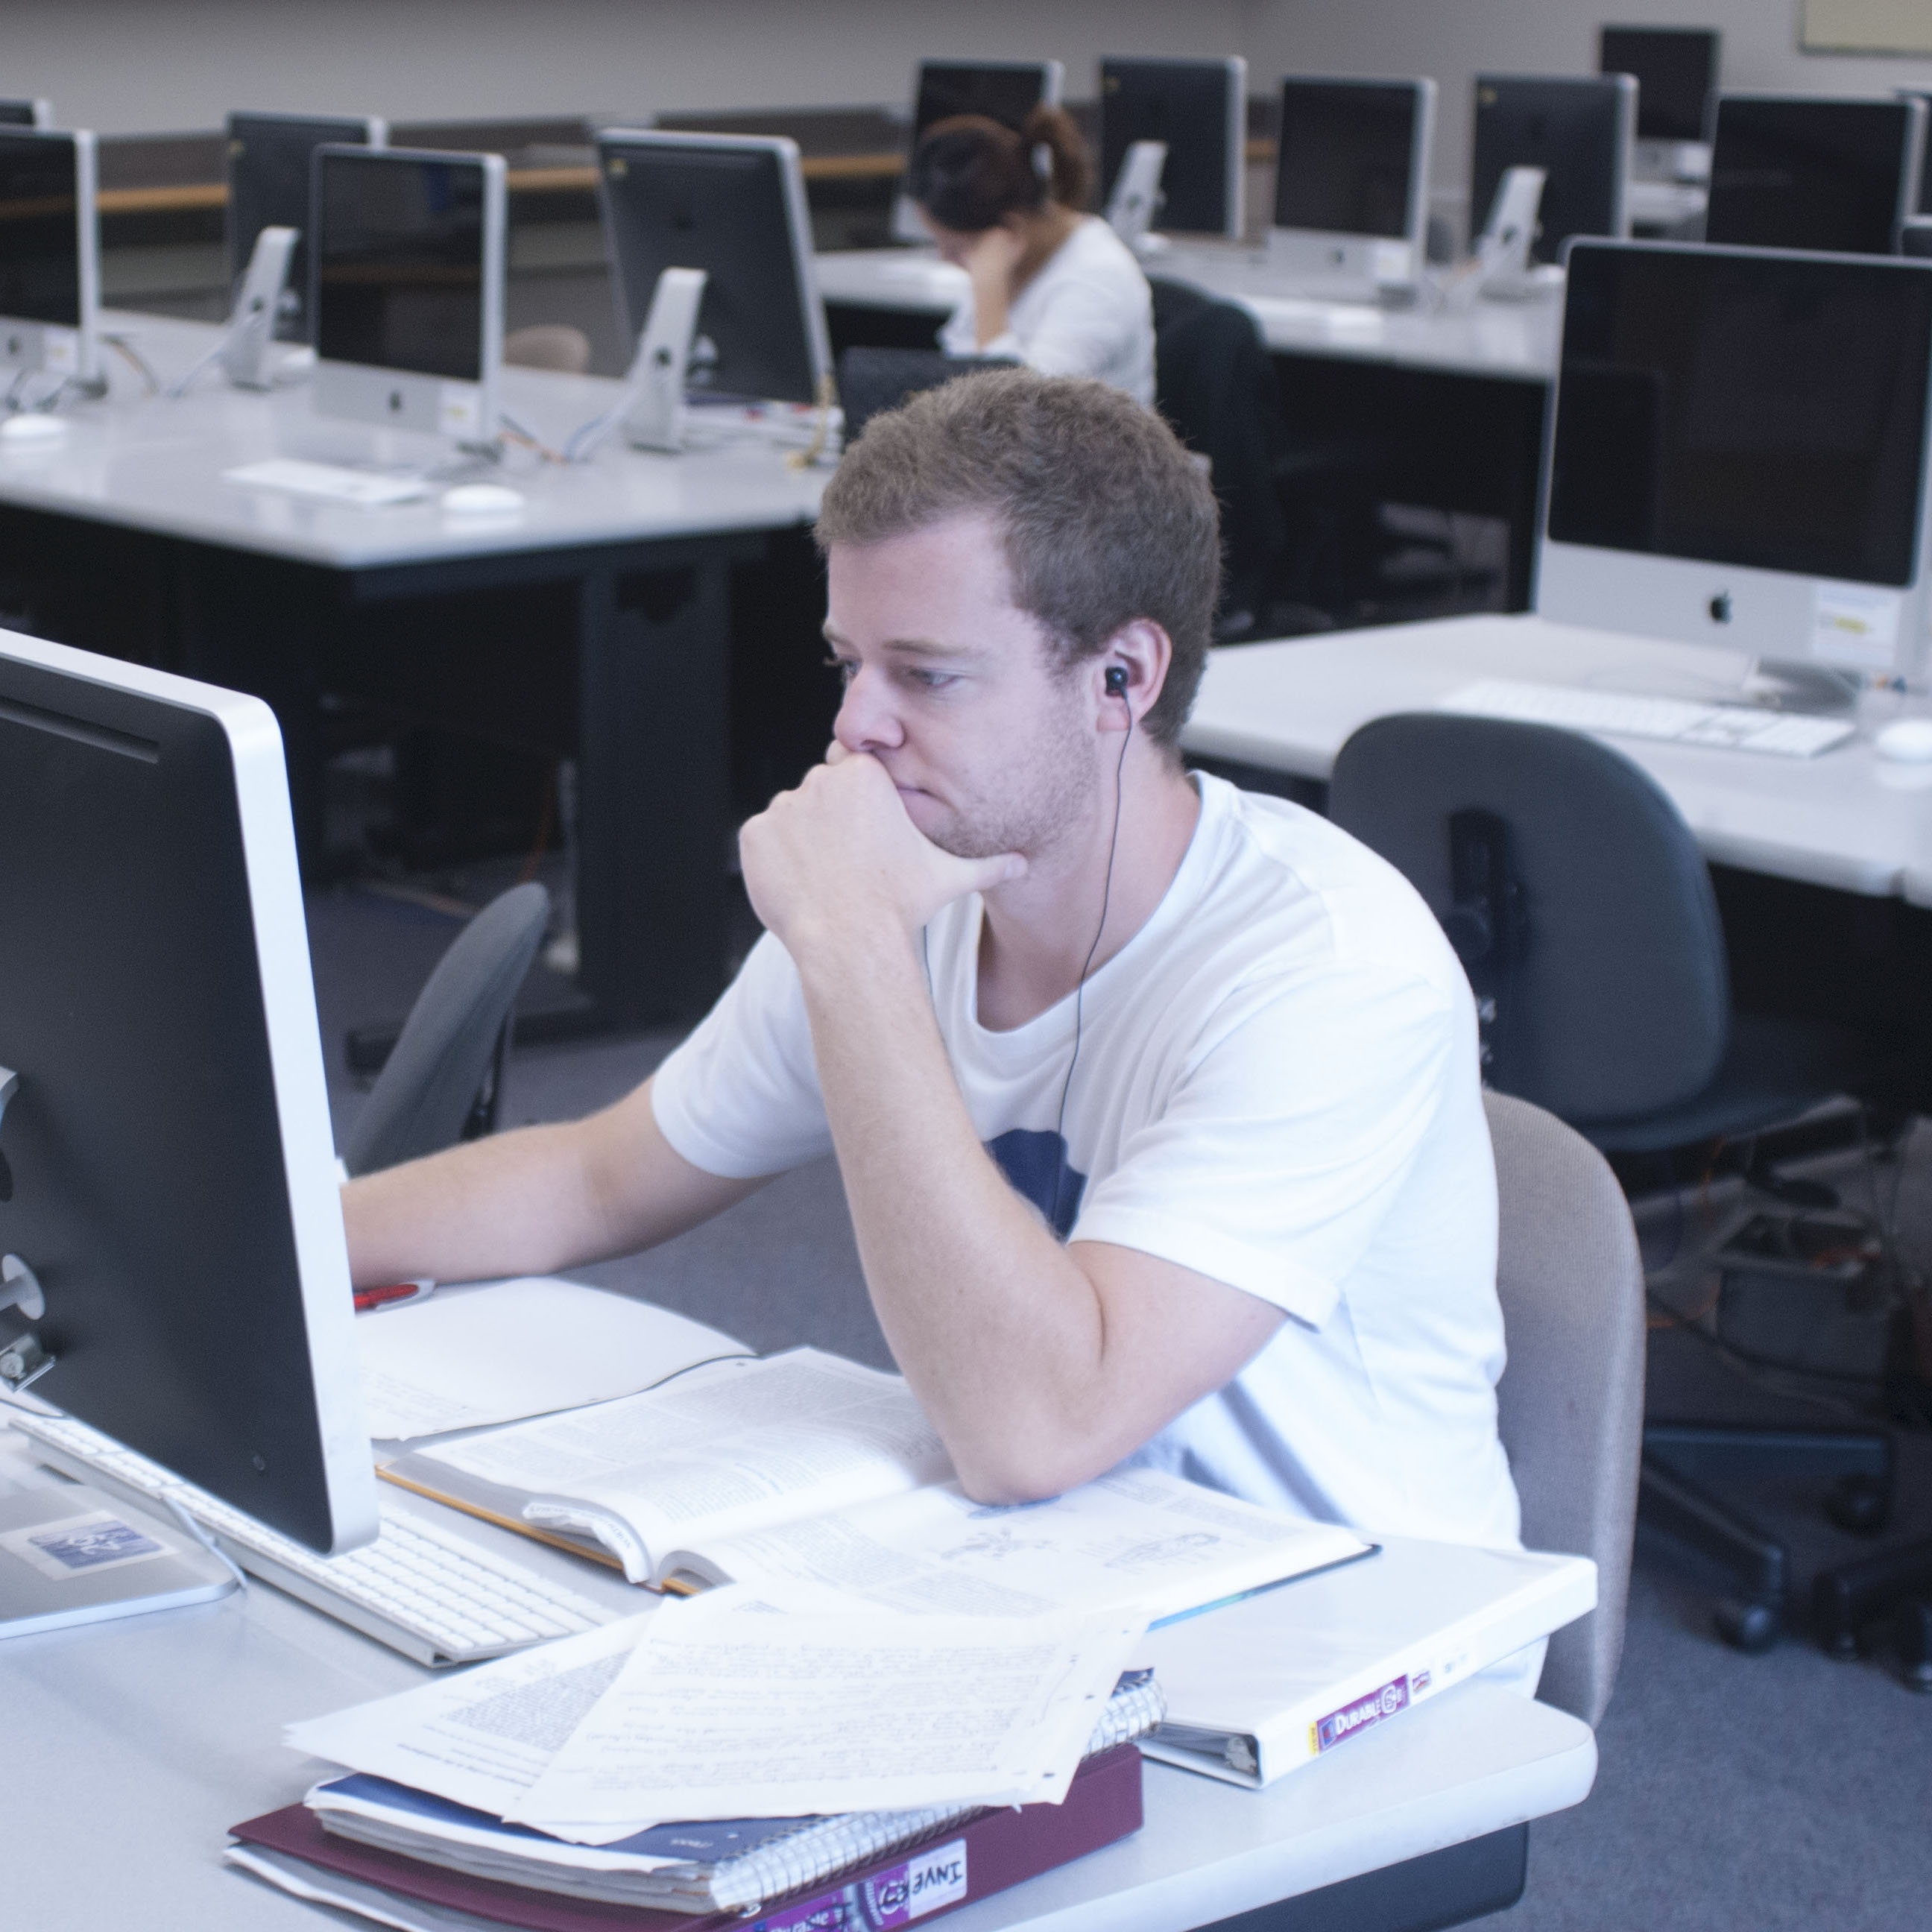 A student in the 24-hour computing lab